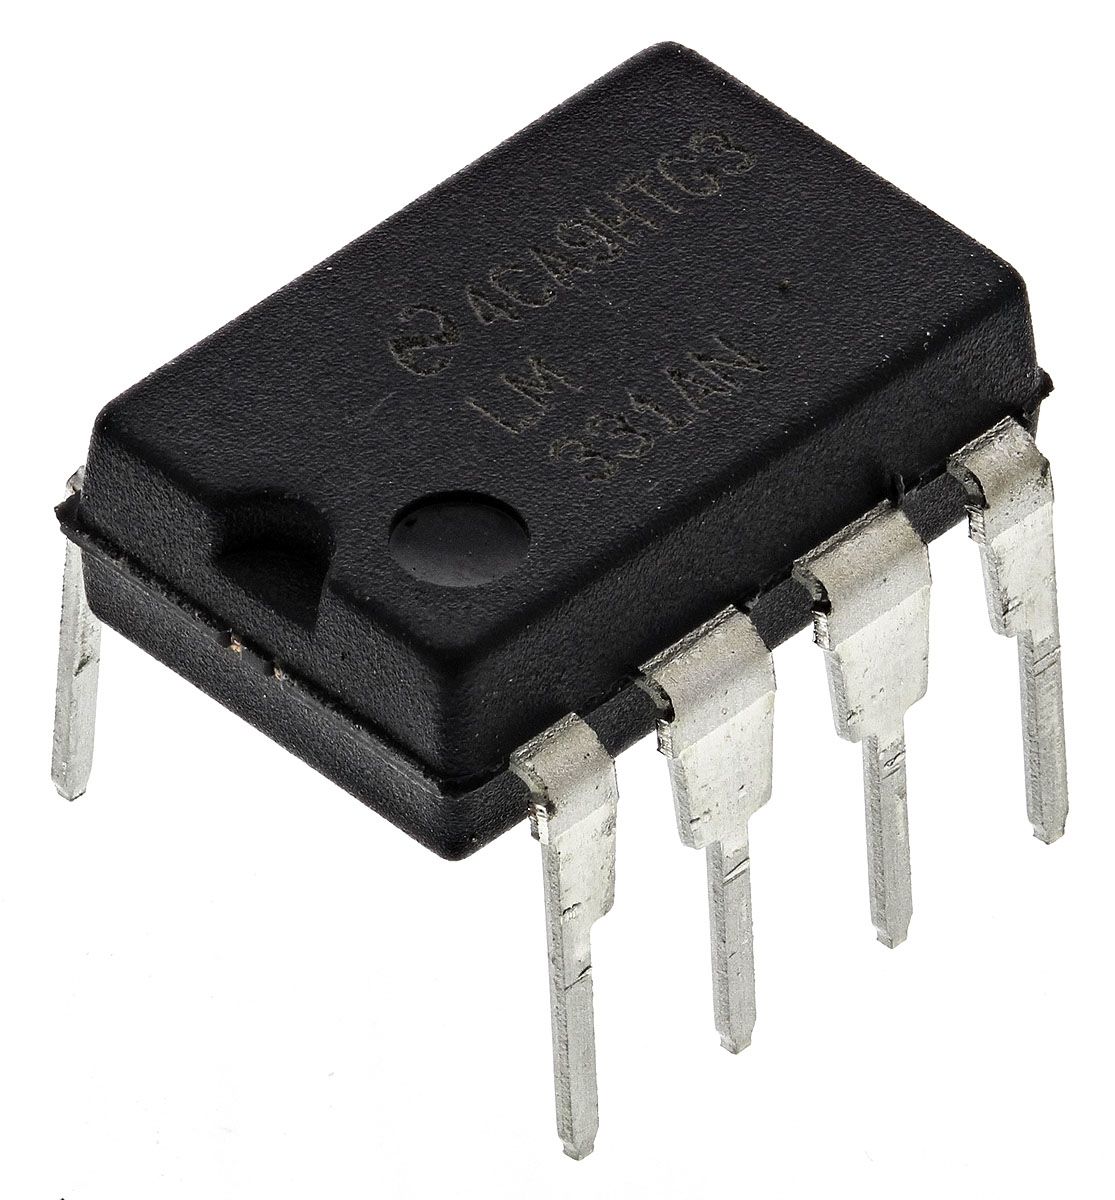 LM331AN/NOPB, Voltage to Frequency Converter 100kHz 0.01%, 8-Pin PDIP